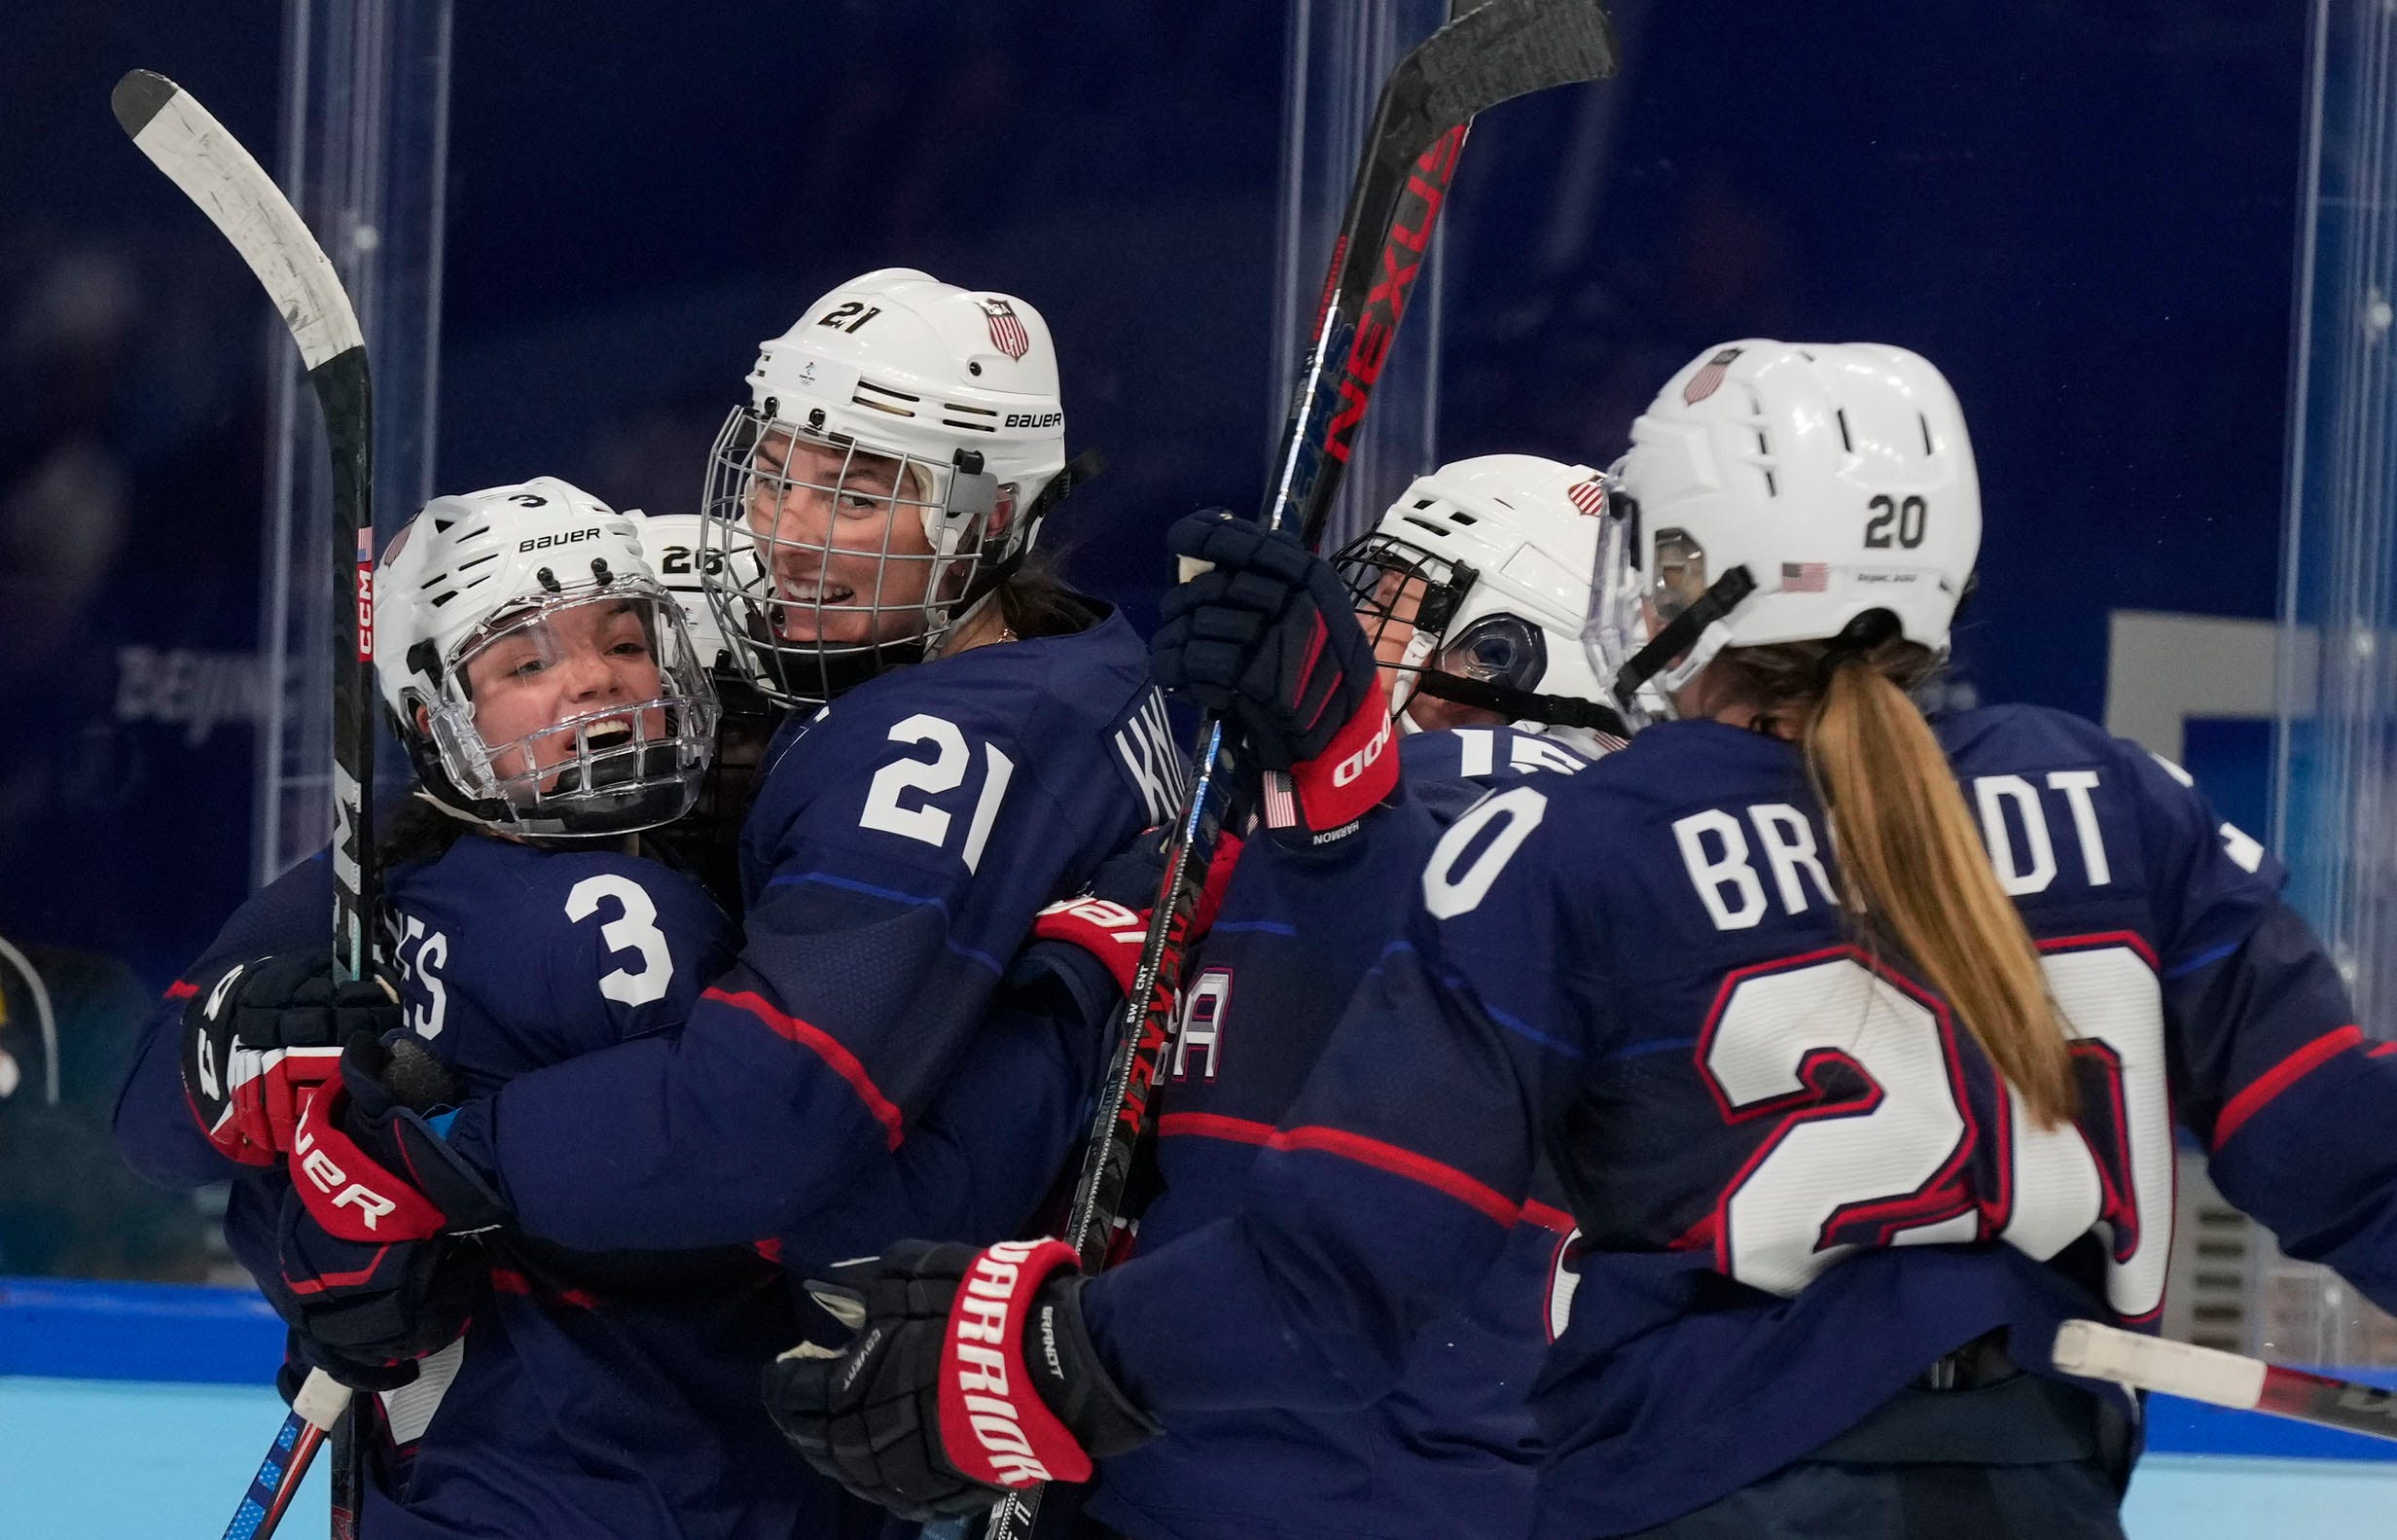 Us Women S Hockey Overcame Obstacles To Reach Olympics Gold Medal Game